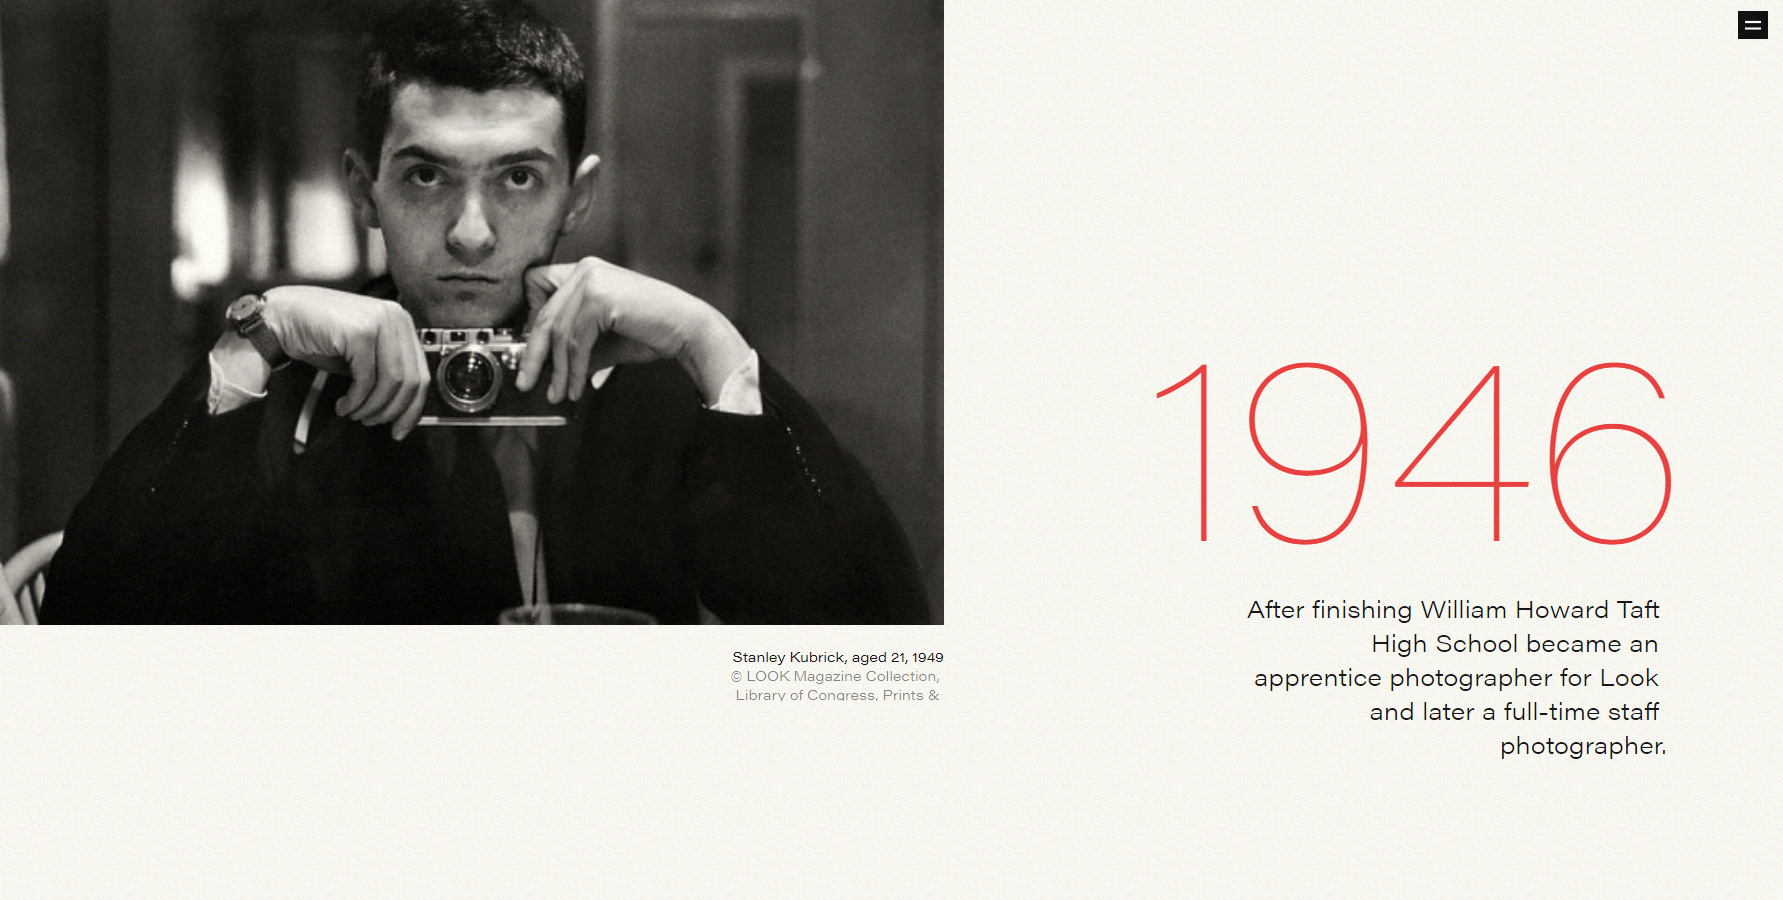 Stanley Kubrick. Work and life - Website of the Day